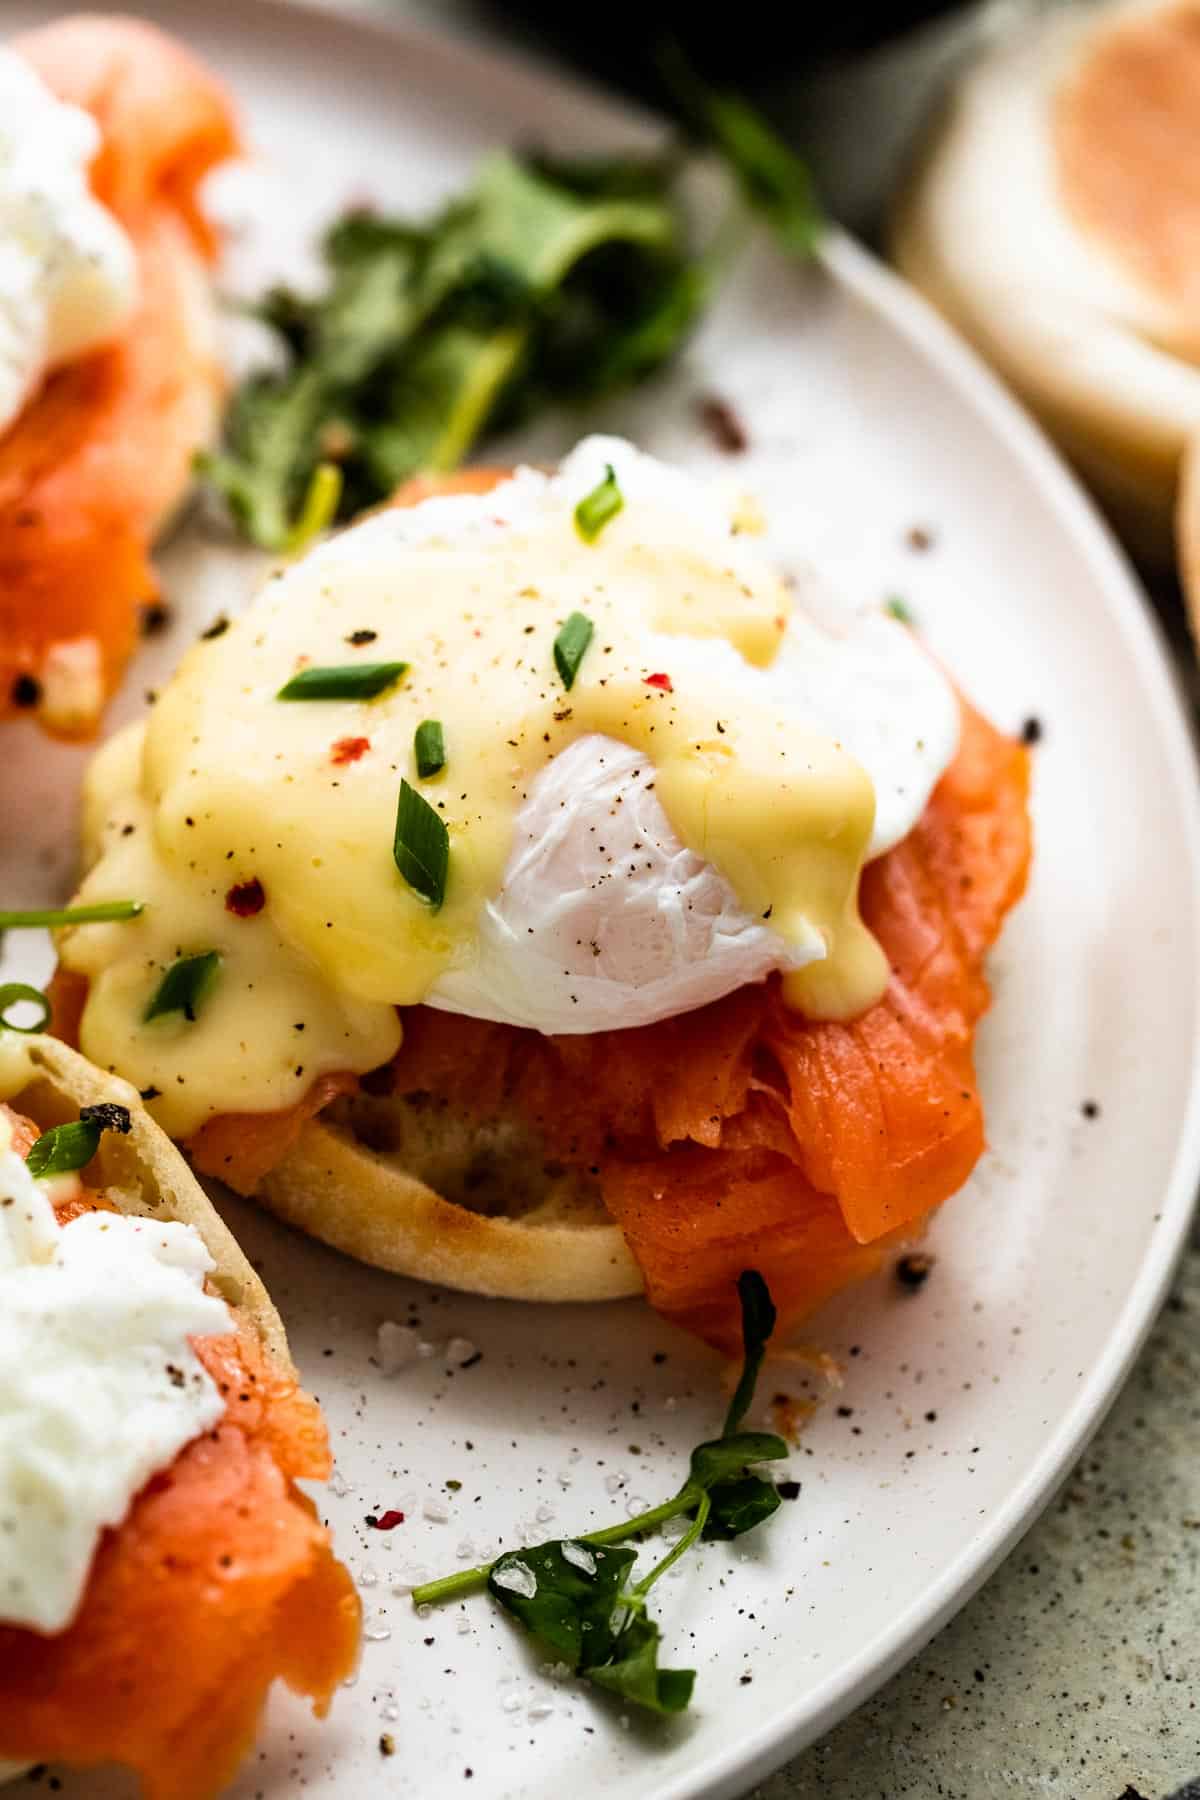 an english muffin topped with a slice of smoked salmon and a poached egg; top is garnished with hollandaise sauce and chopped chives.